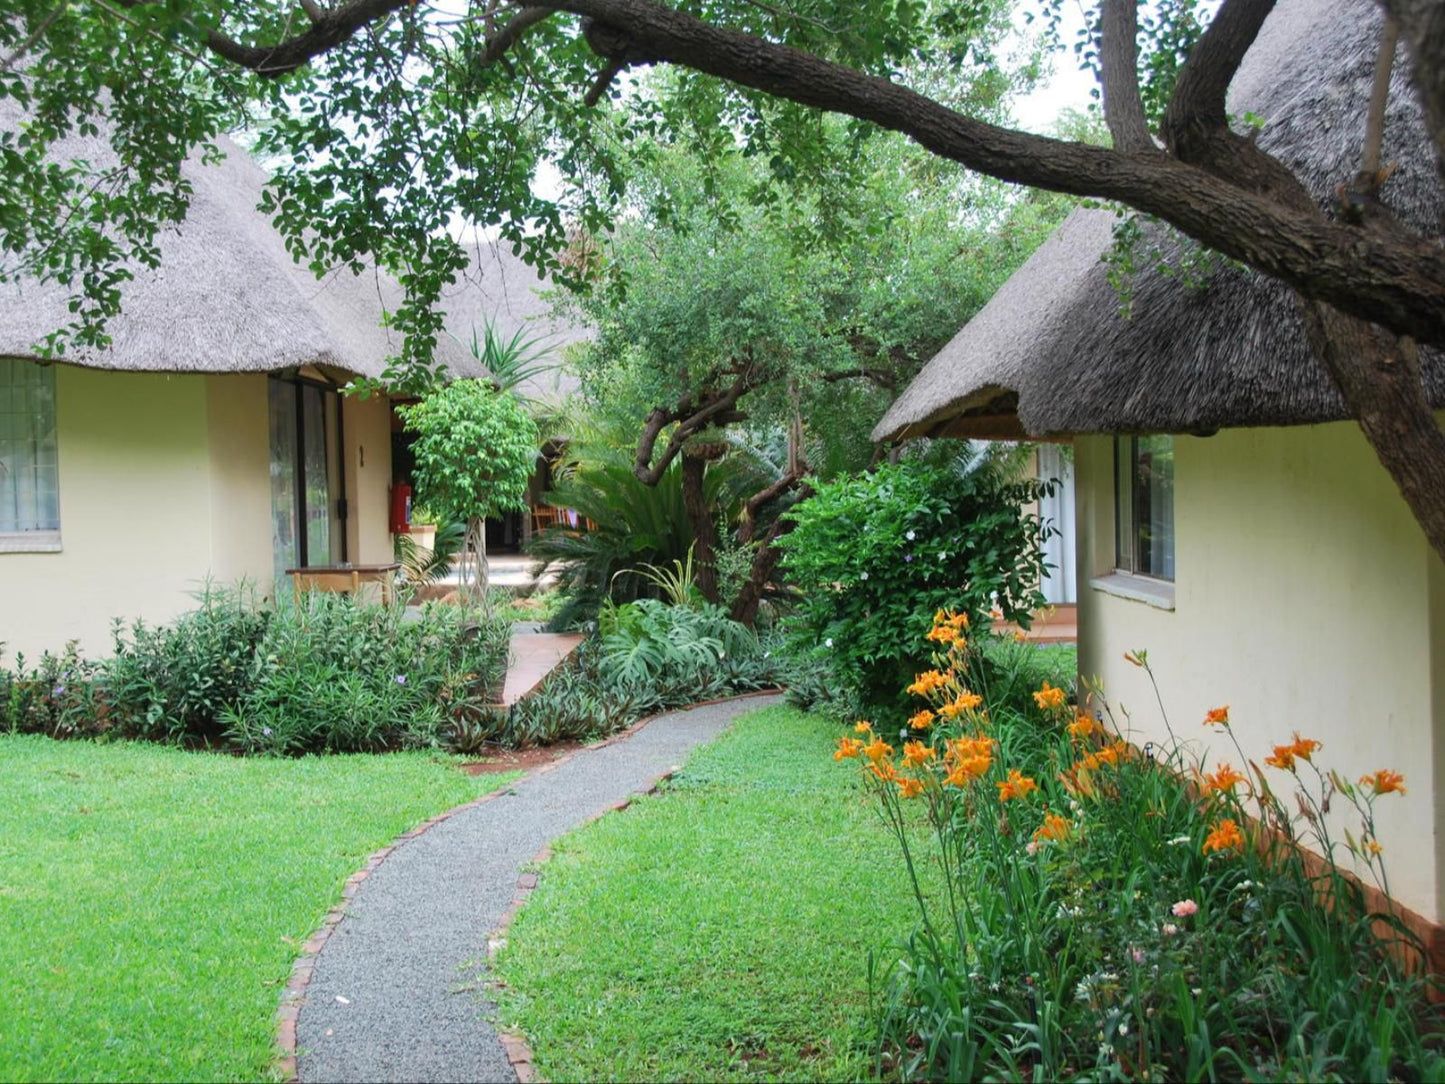 Acasia Guest Lodge Komatipoort Mpumalanga South Africa House, Building, Architecture, Plant, Nature, Garden